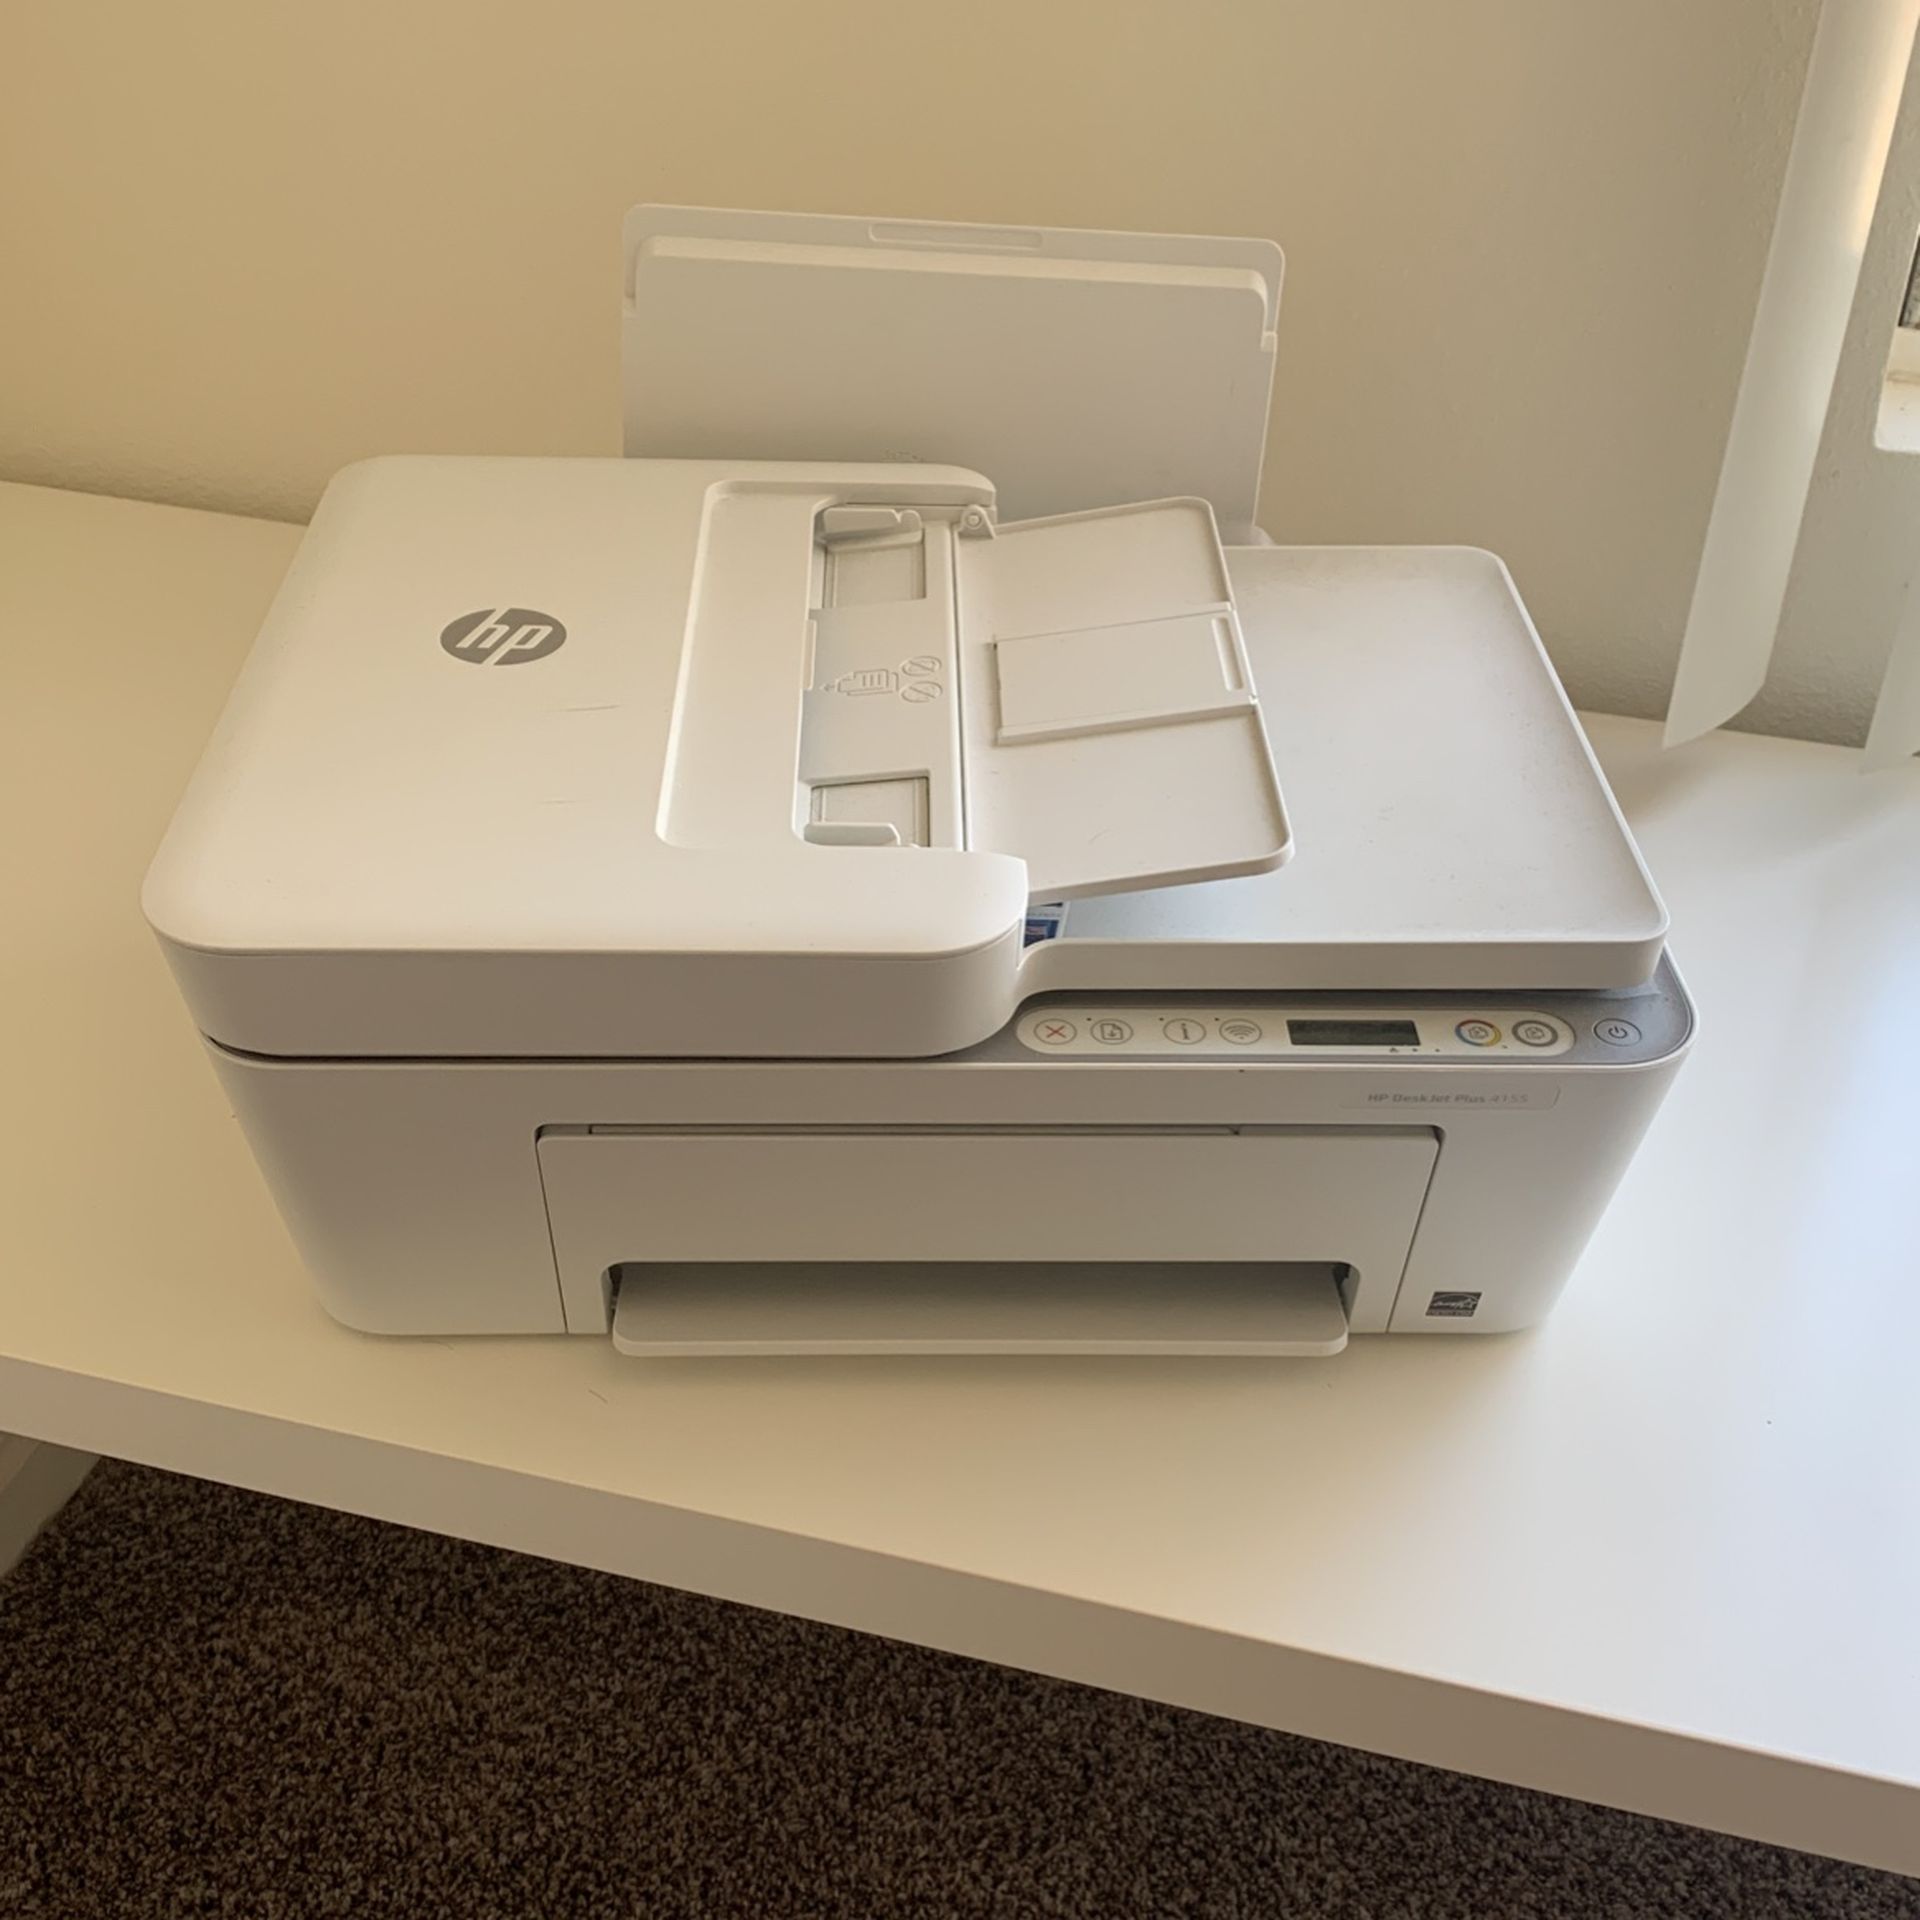 Hp Printer HP DeskJet 4155e Wireless All-In-One Color Printer, Scanner,  Copier with Instant Ink and HP+ (26Q90A) for Sale in Whittier, CA - OfferUp